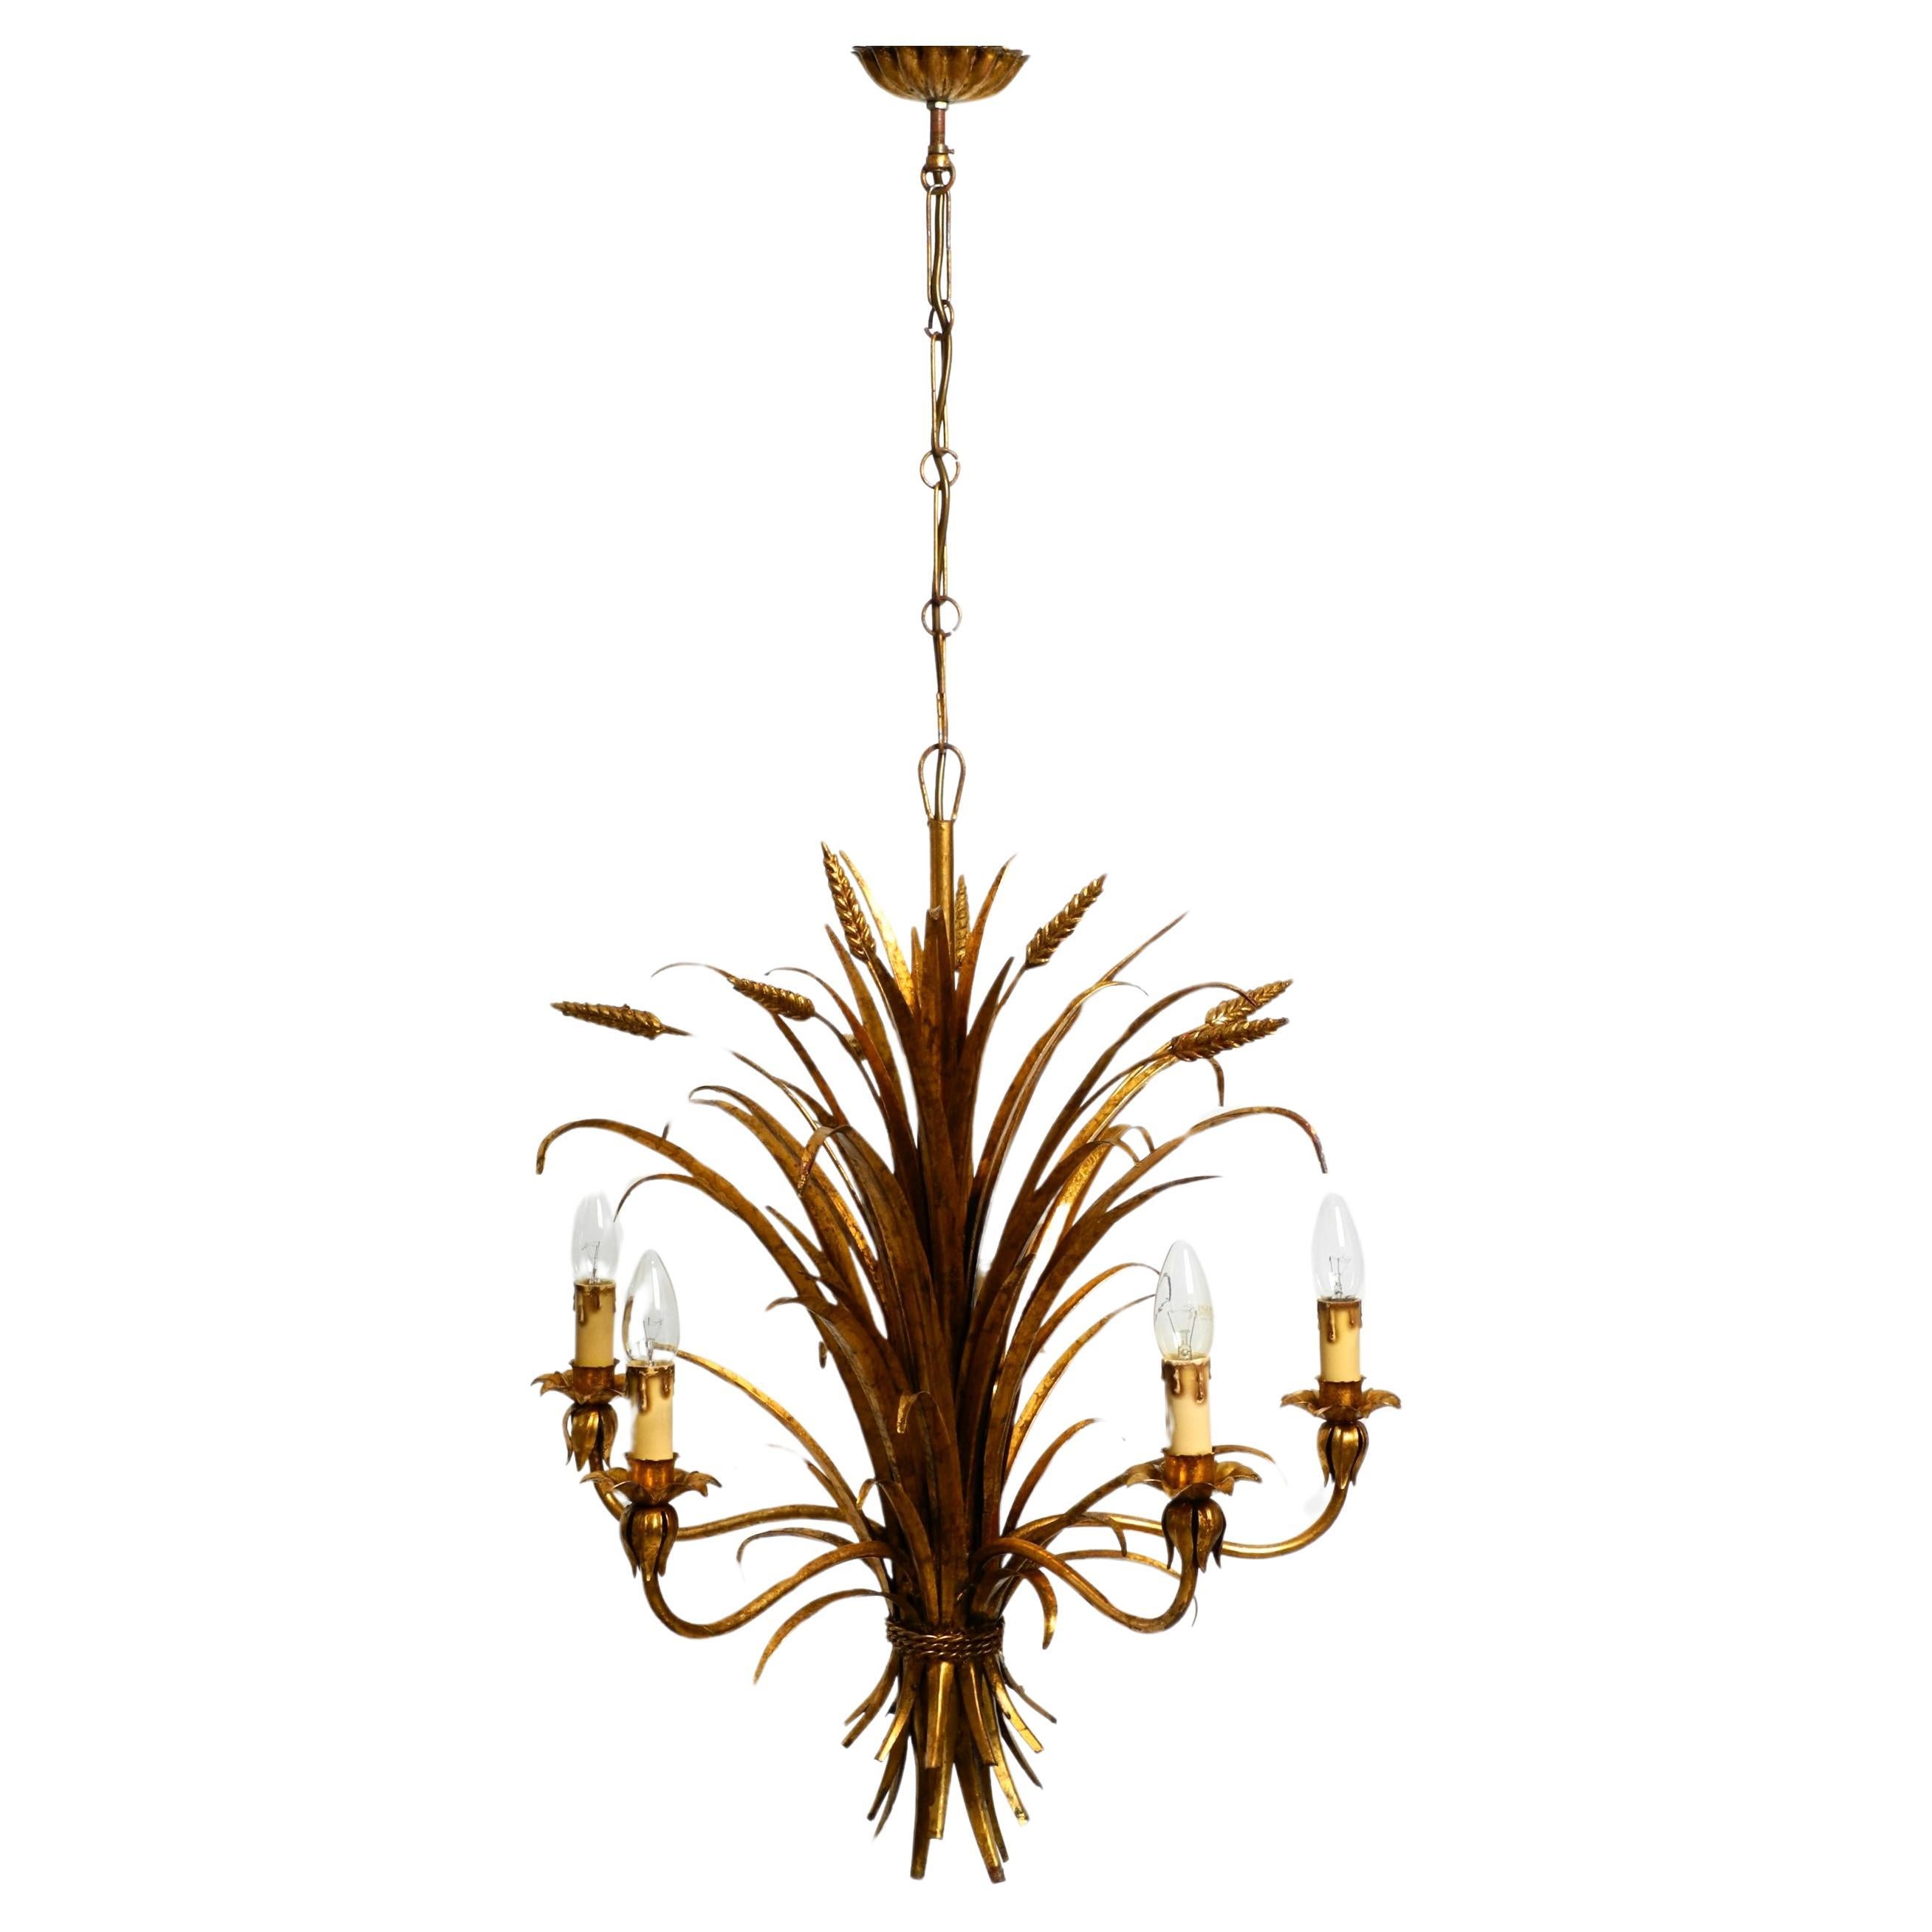 Beautiful 1970s gold-plated 5-arm tall metal chandelier by Hans Kögl